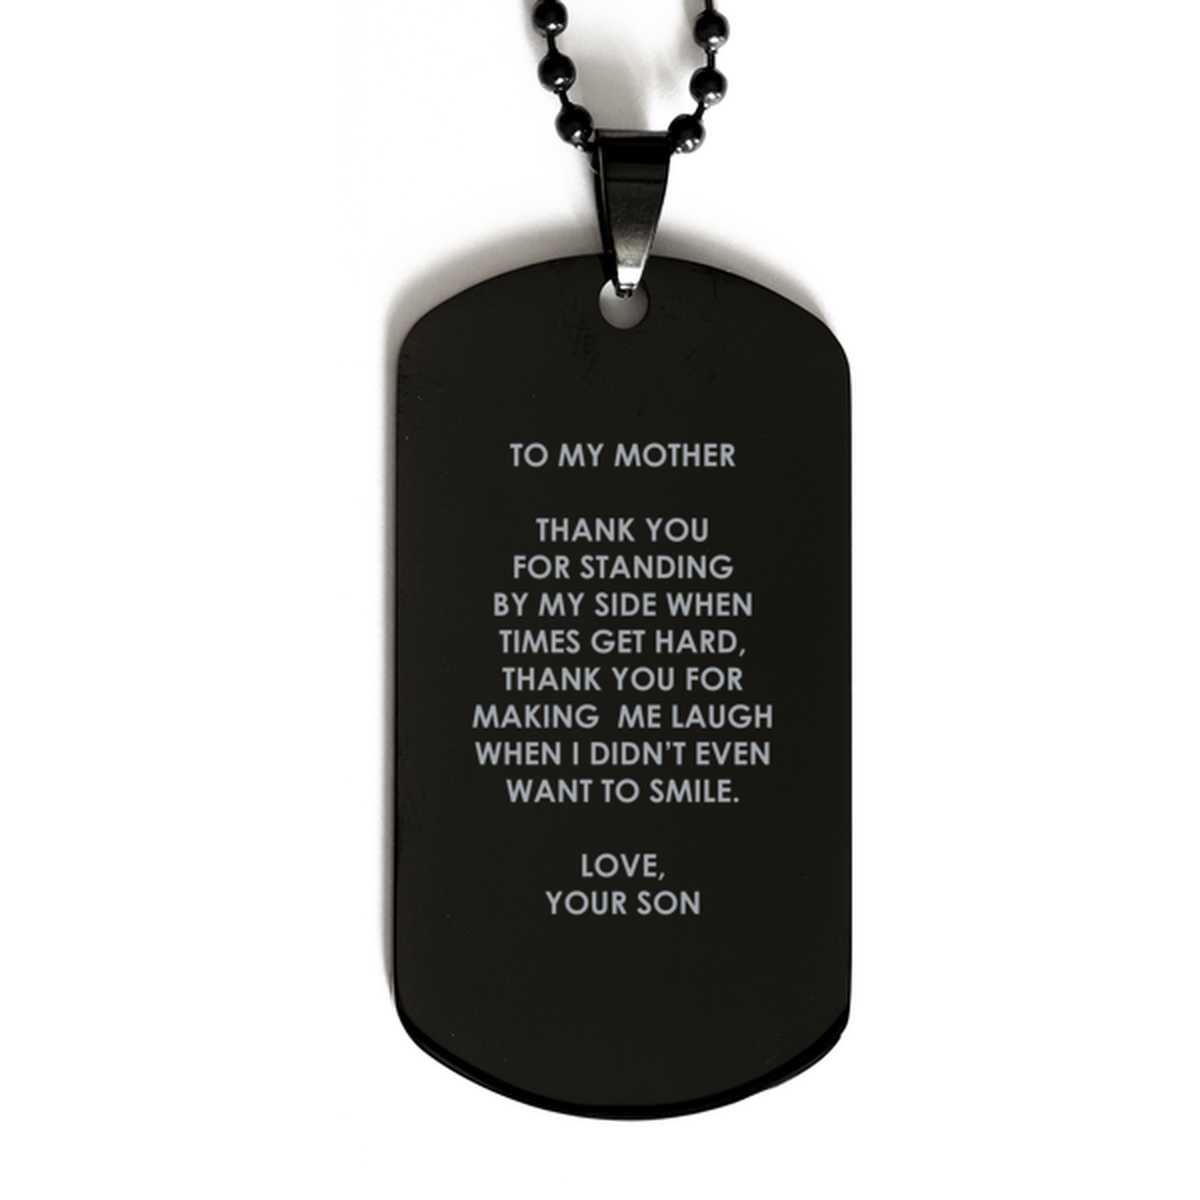 To My Mother  Black Dog Tag, Thank You For Standing By My Side, Valentines Gifts For Mother From Son, Birthday Gifts For Women